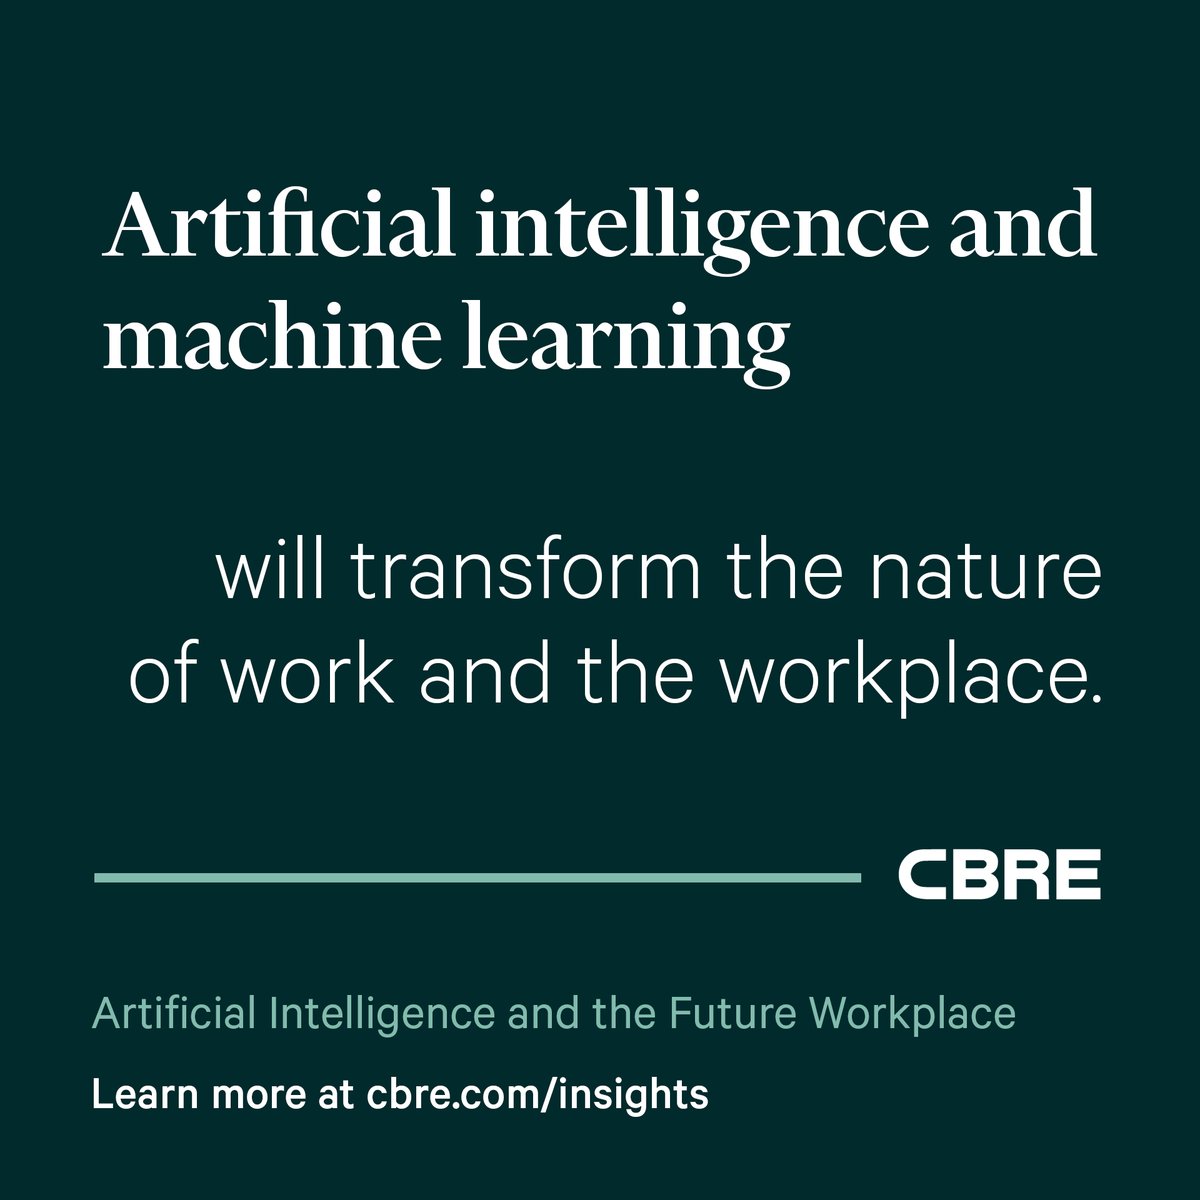 Our report on #AI and #MachineLearning offers insights into what jobs will see increased demand and which jobs may need to upskill. Read more here: cbre.co/3yaKf31